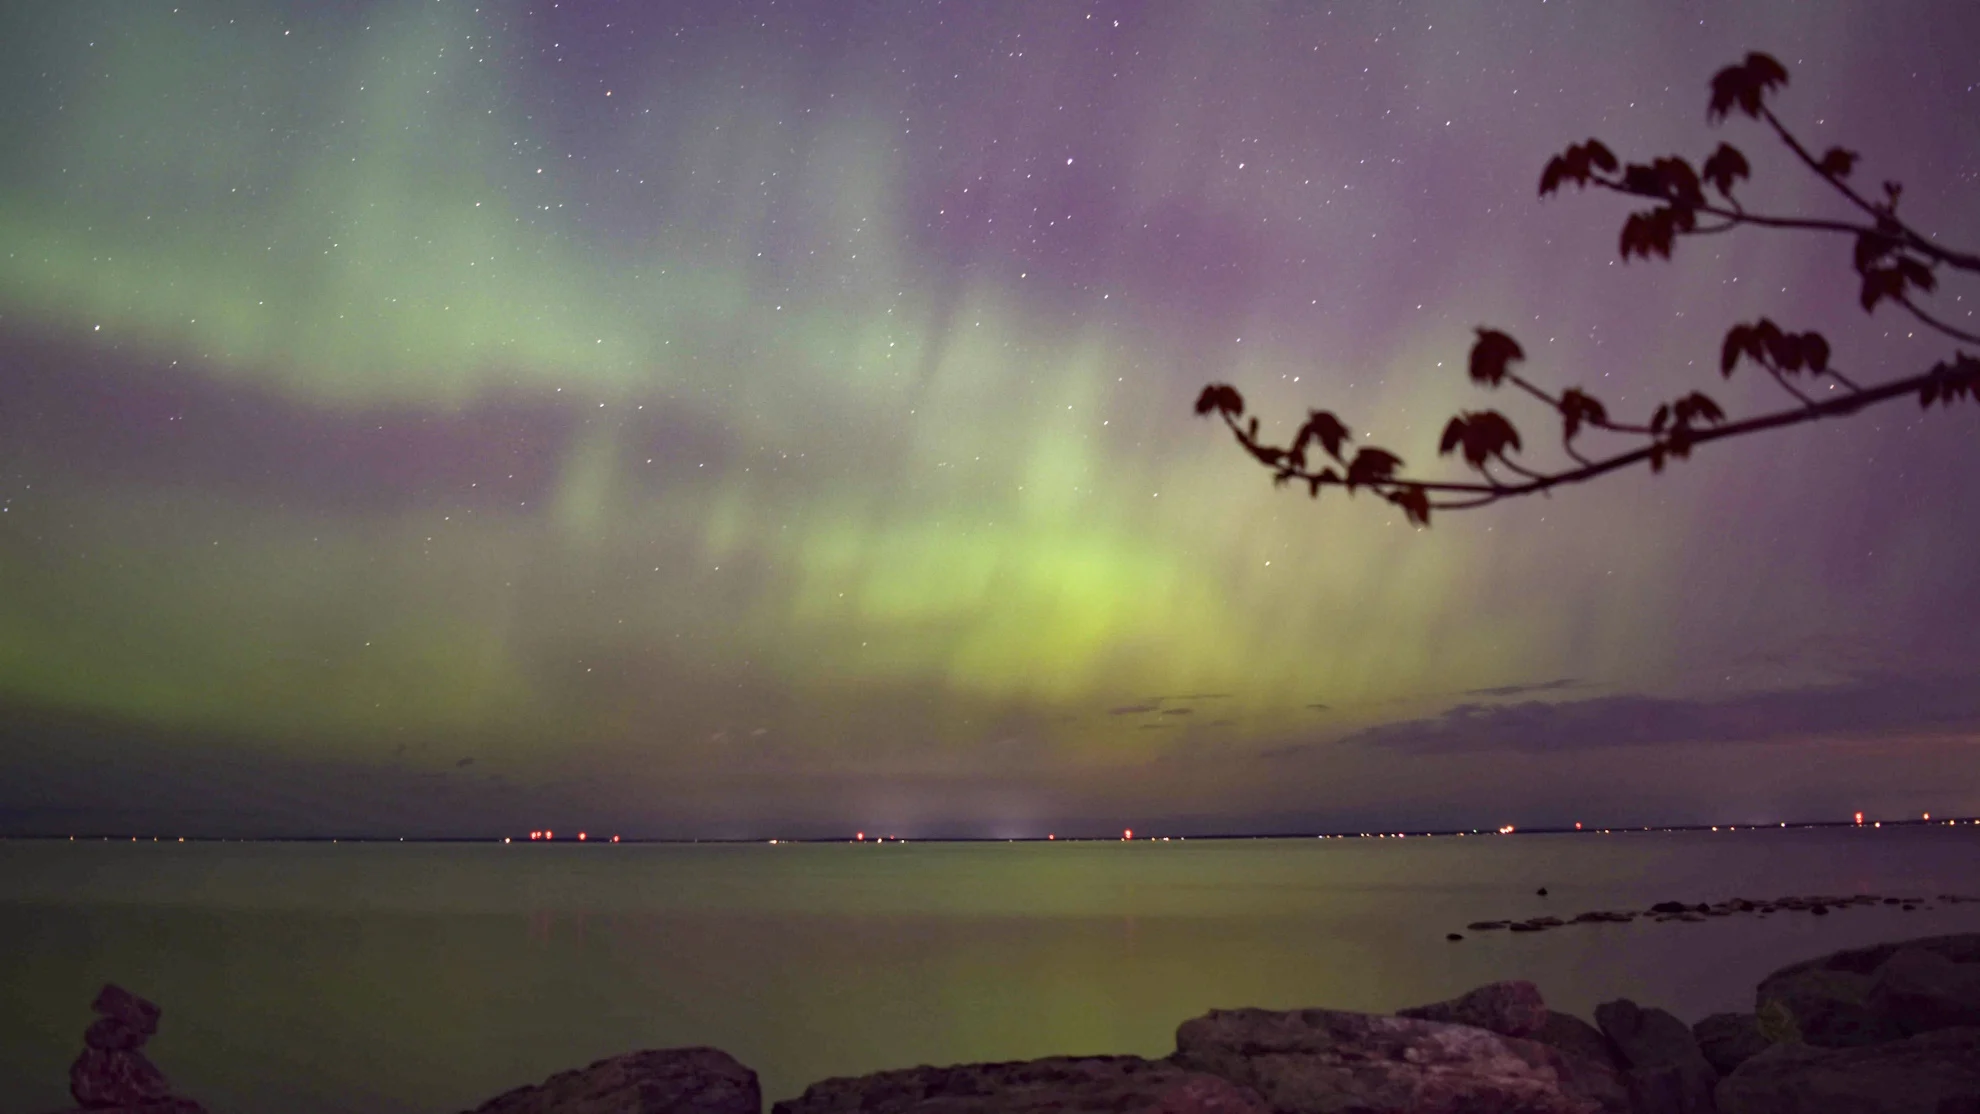 Look up! Parts of the East Coast could see widespread auroras again tonight—if clouds cooperate. Details, here